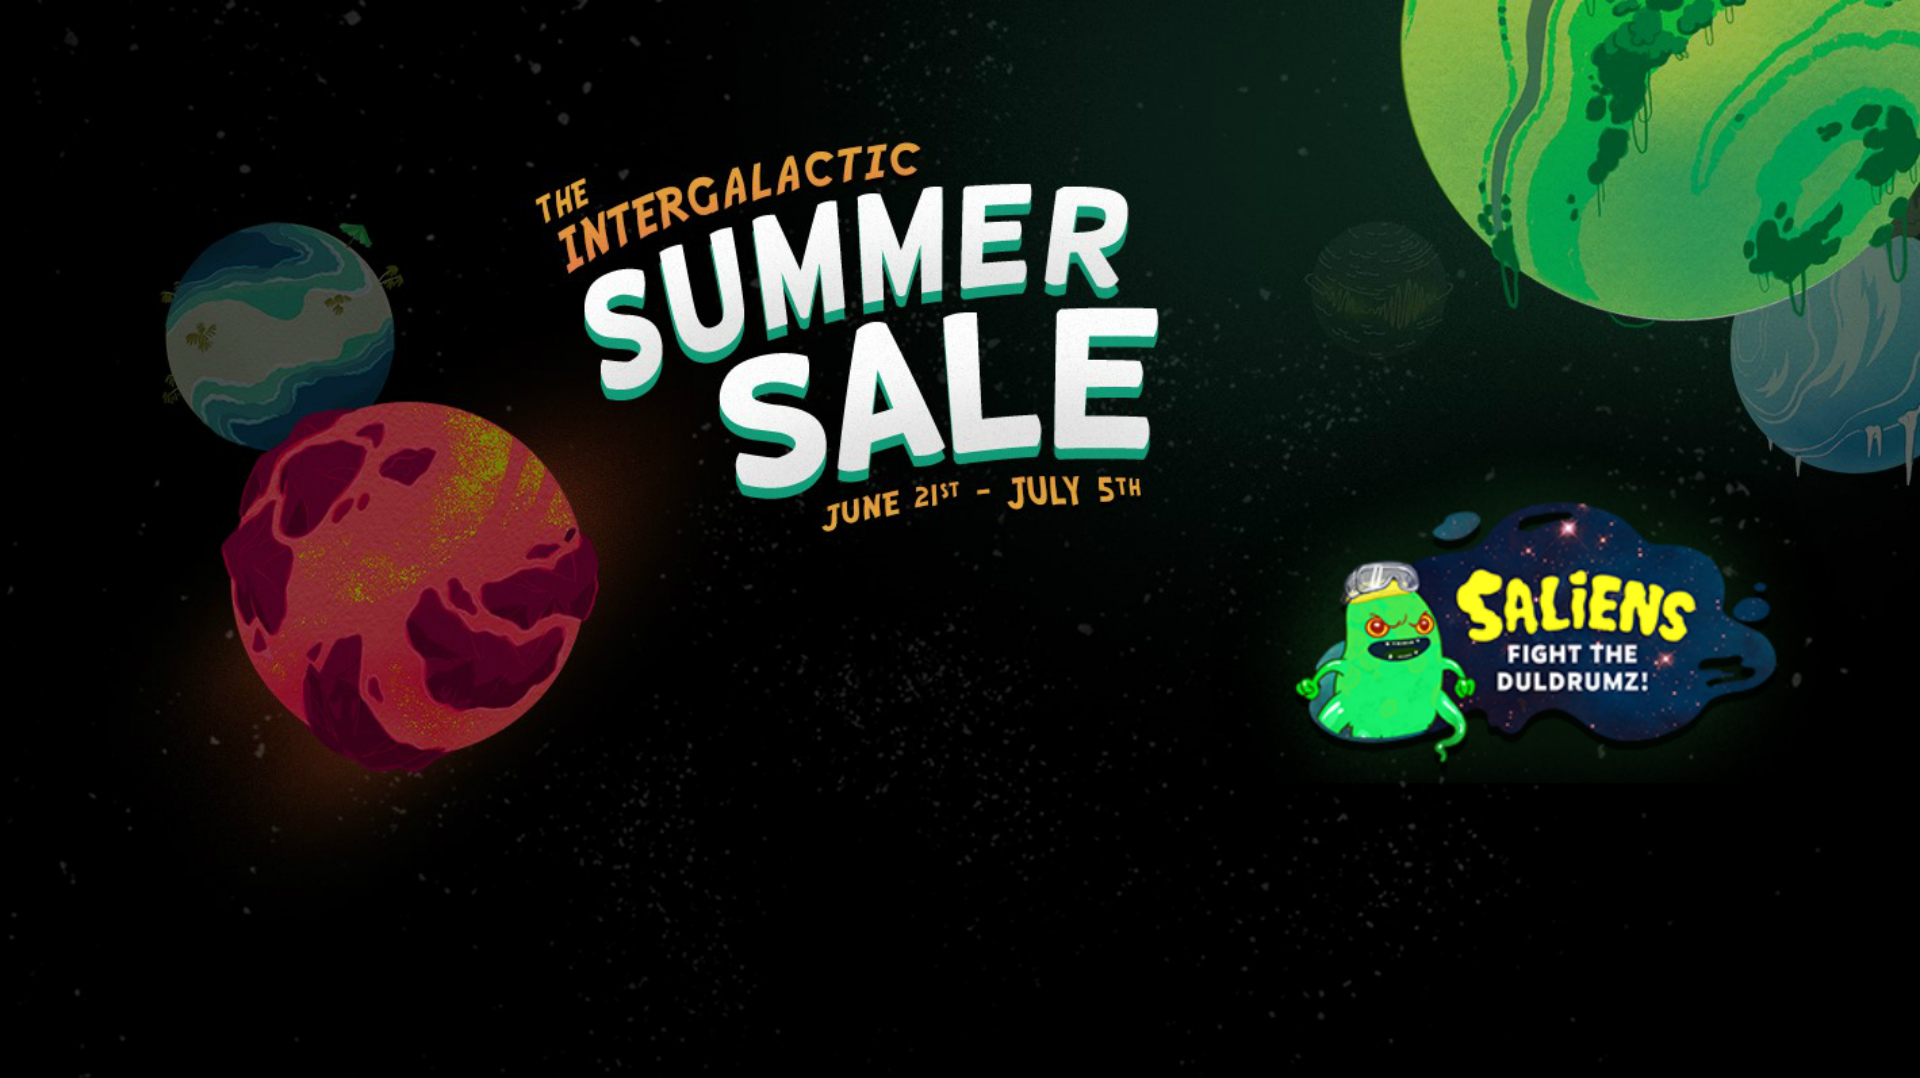 Steam Summer Sale Crashes Steam Store - VR News, Games, And Reviews